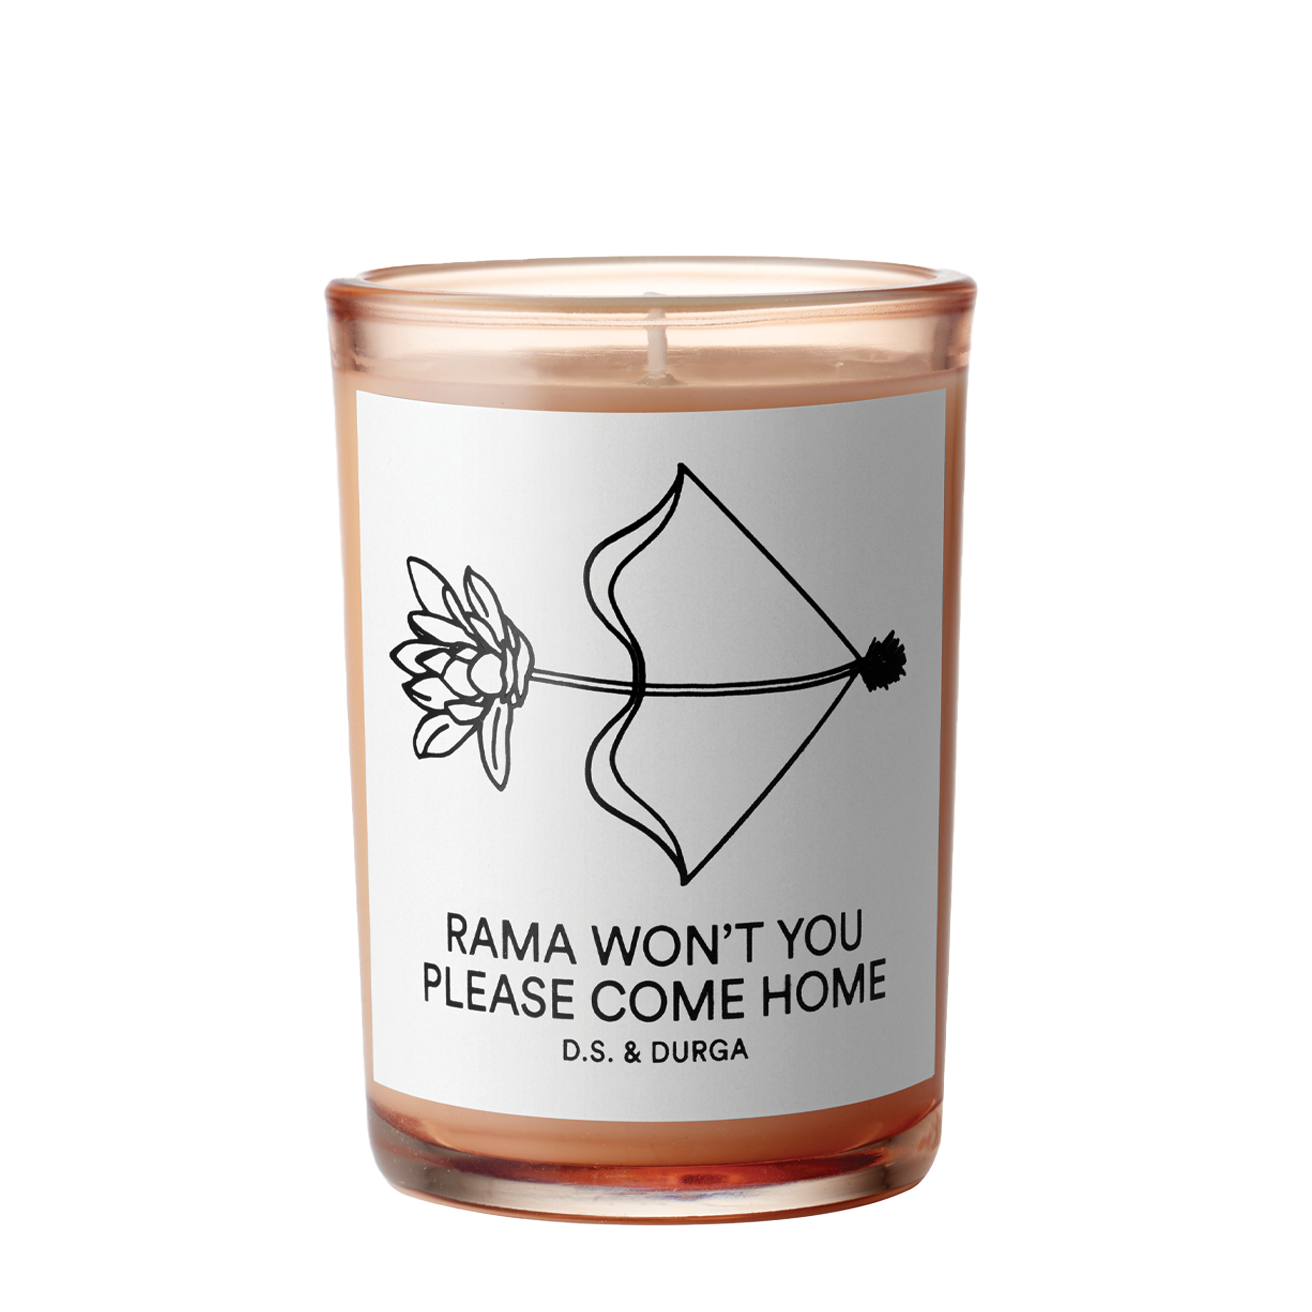 d.s. & dURGA RAMA WON'T YOU PLEASE COME HOME CANDLE